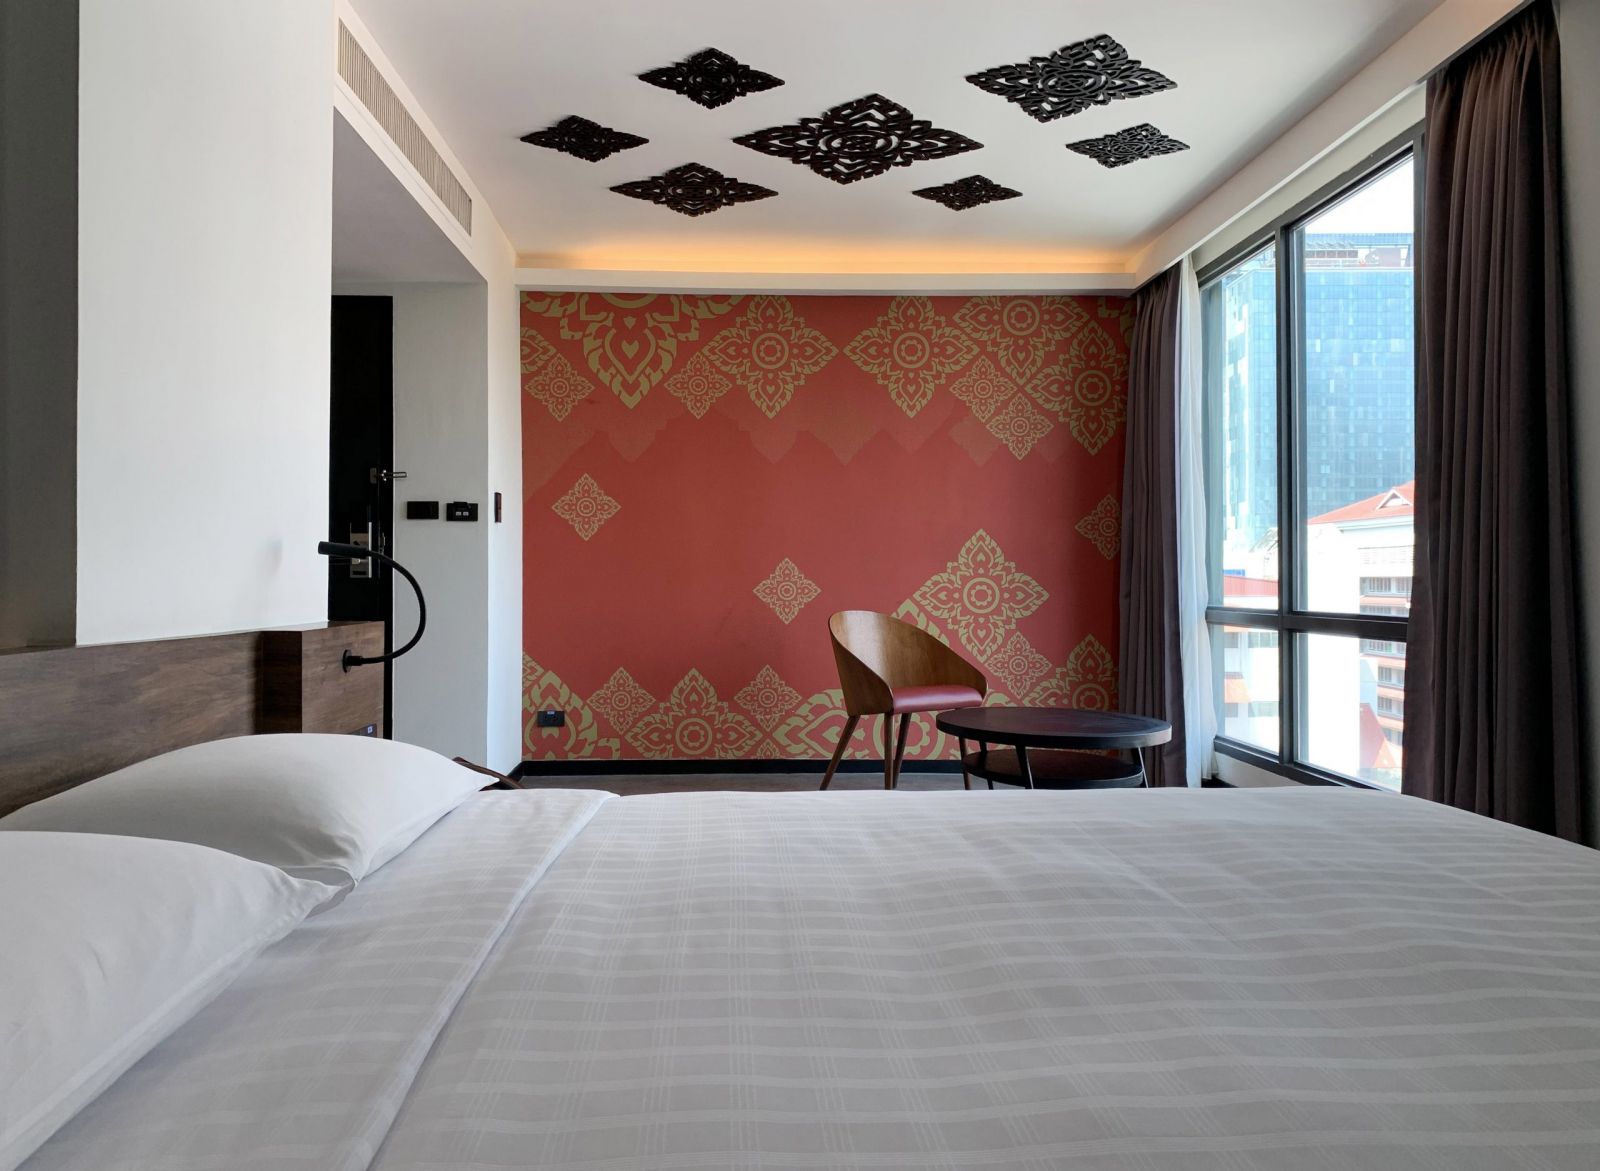 Maitria Hotels & Residences Bangkok Launches New ASQ Packages